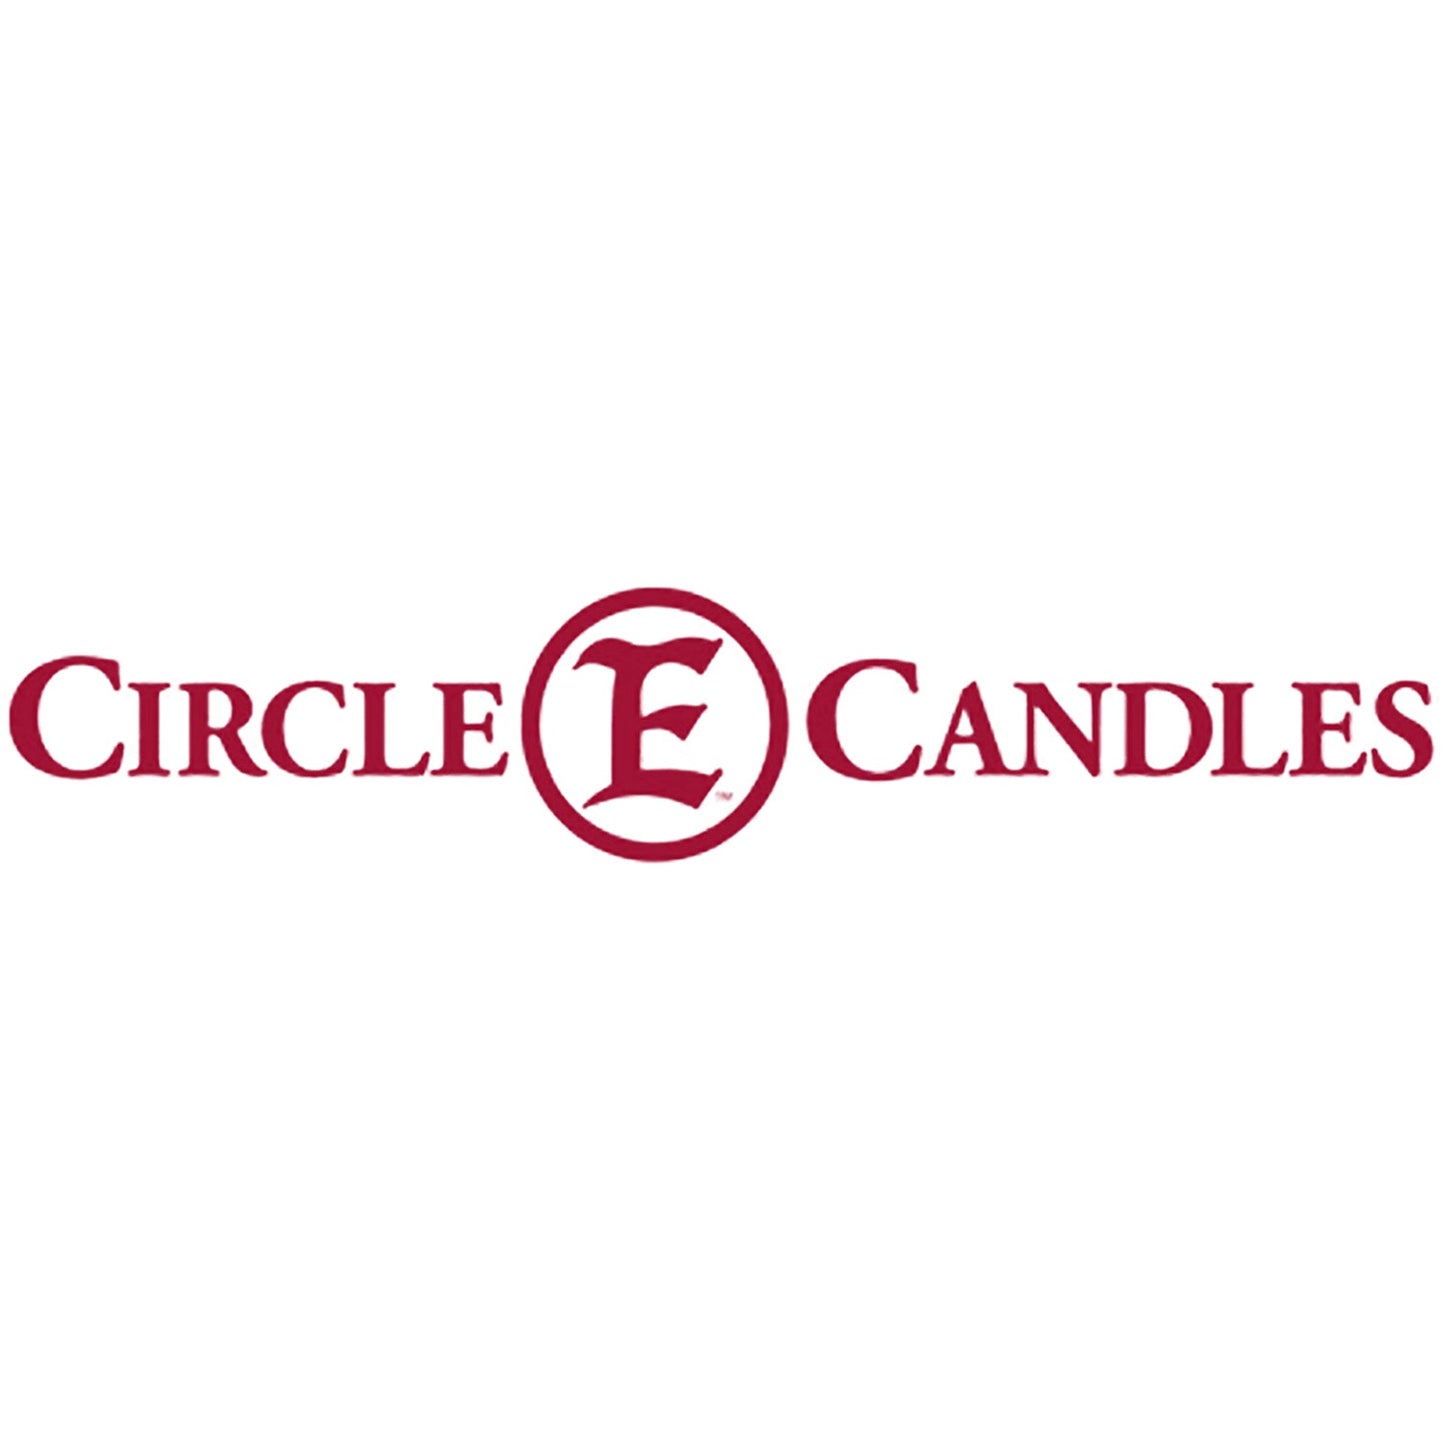 Circle E Candles Wax Melt Tart, Sugar and Suede Scent, Pack of 10 Tarts